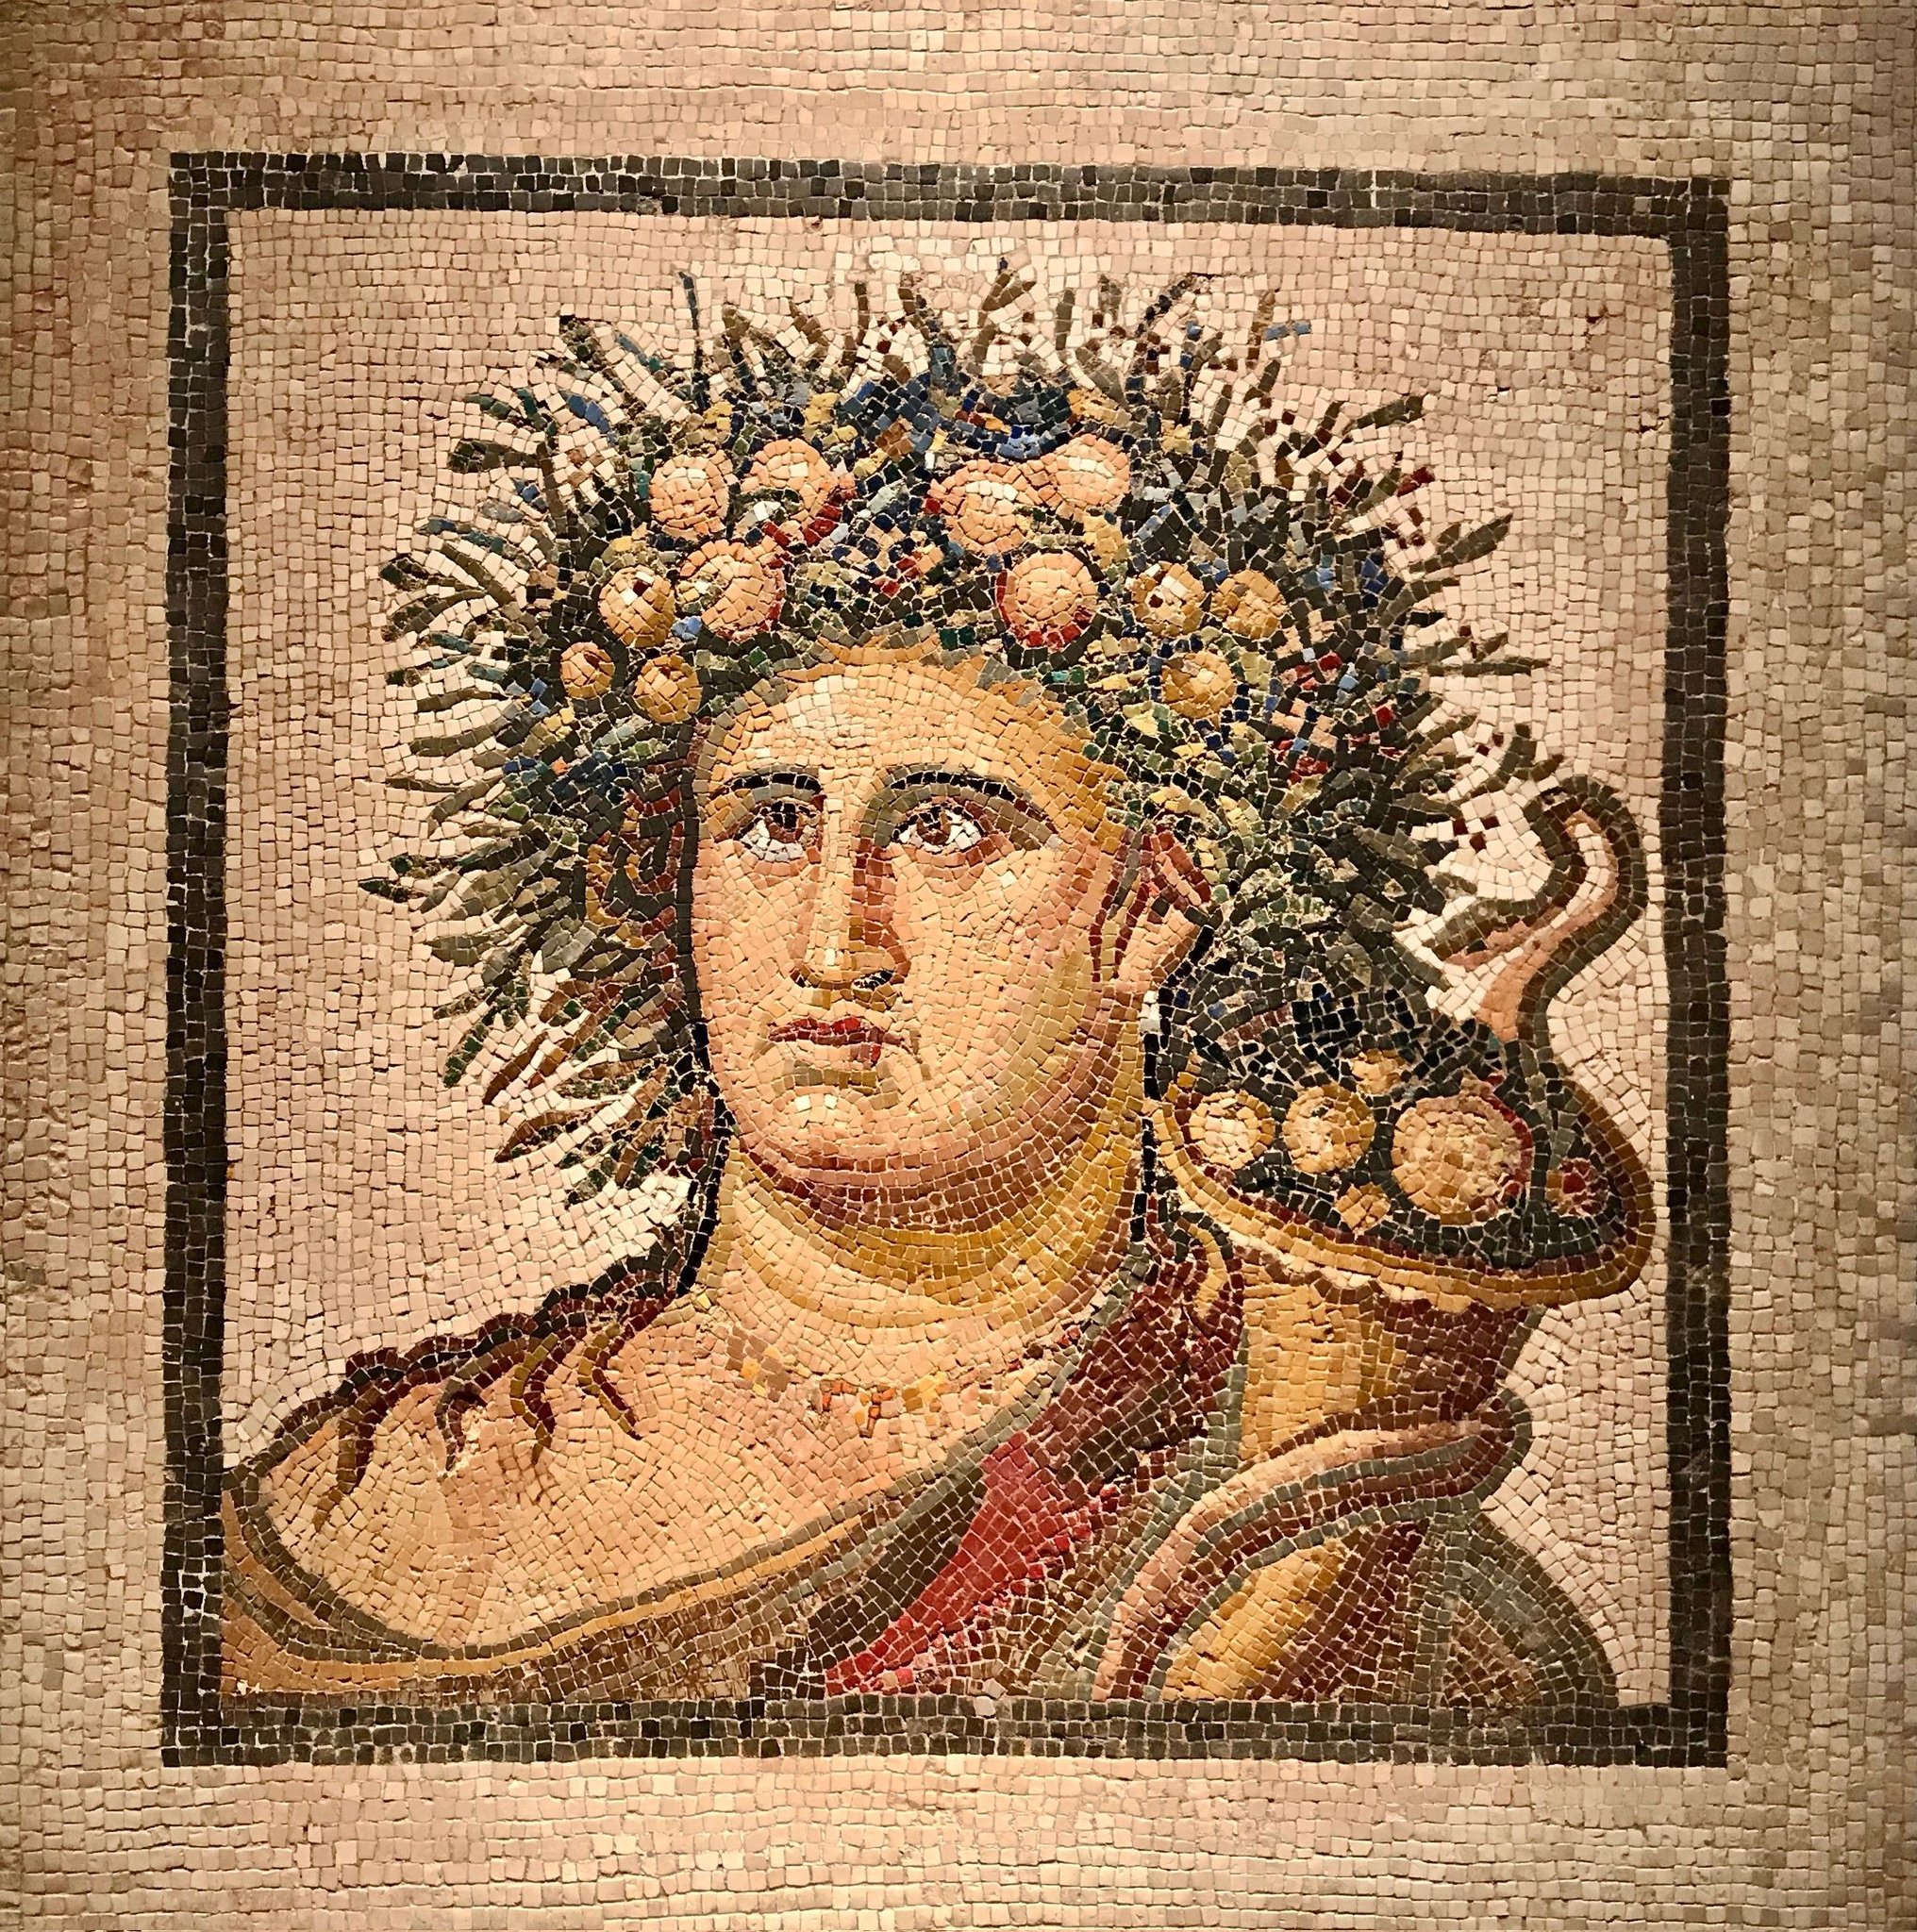 Roman mosaic from Hispania depicting the Genius of the Year who blesses the seasons and harvests. 2nd century C.E..jpg